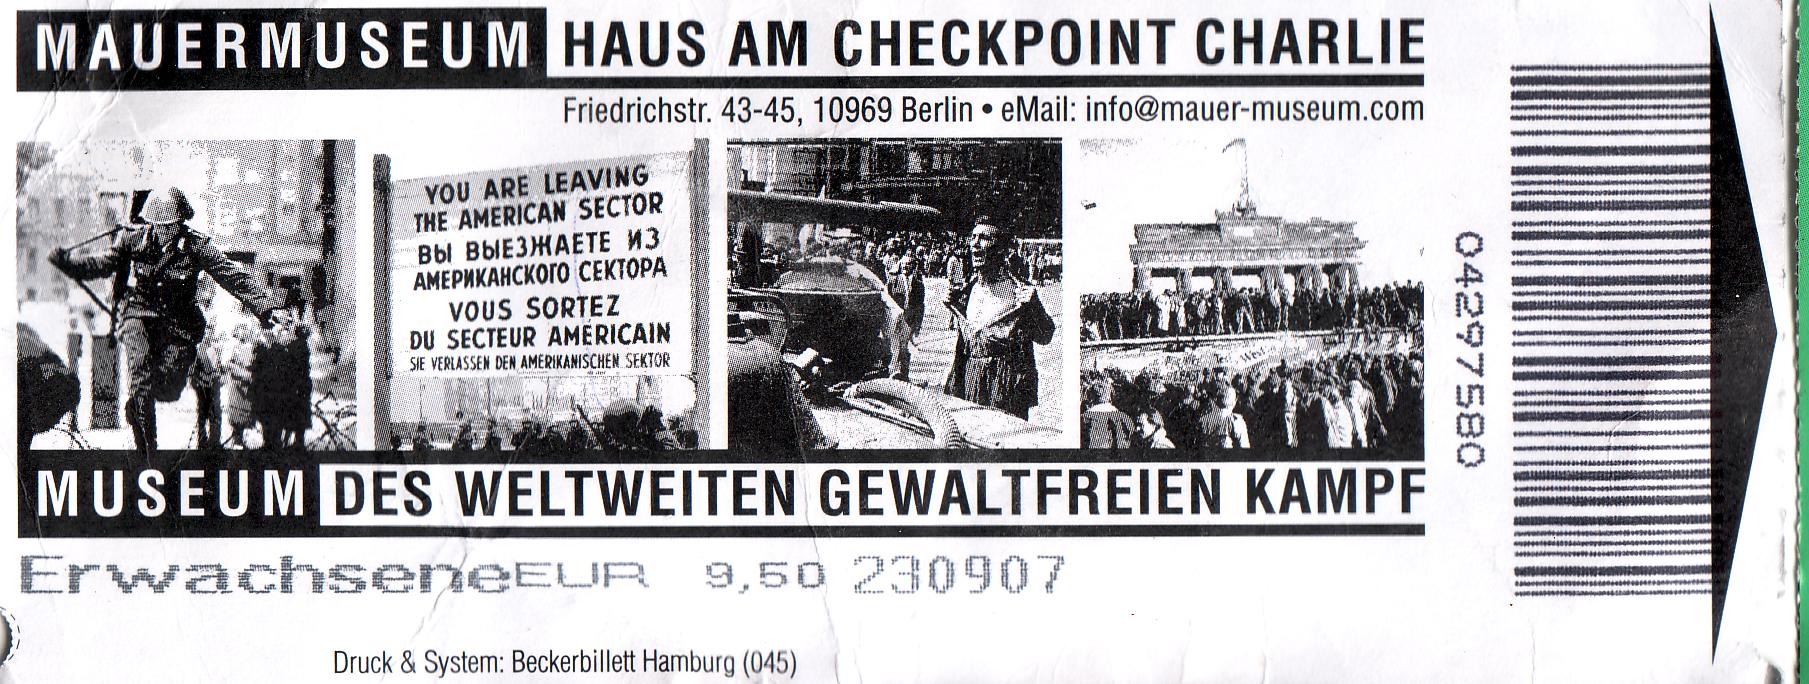 2007-09-23-Checkpoint Charlie Museum